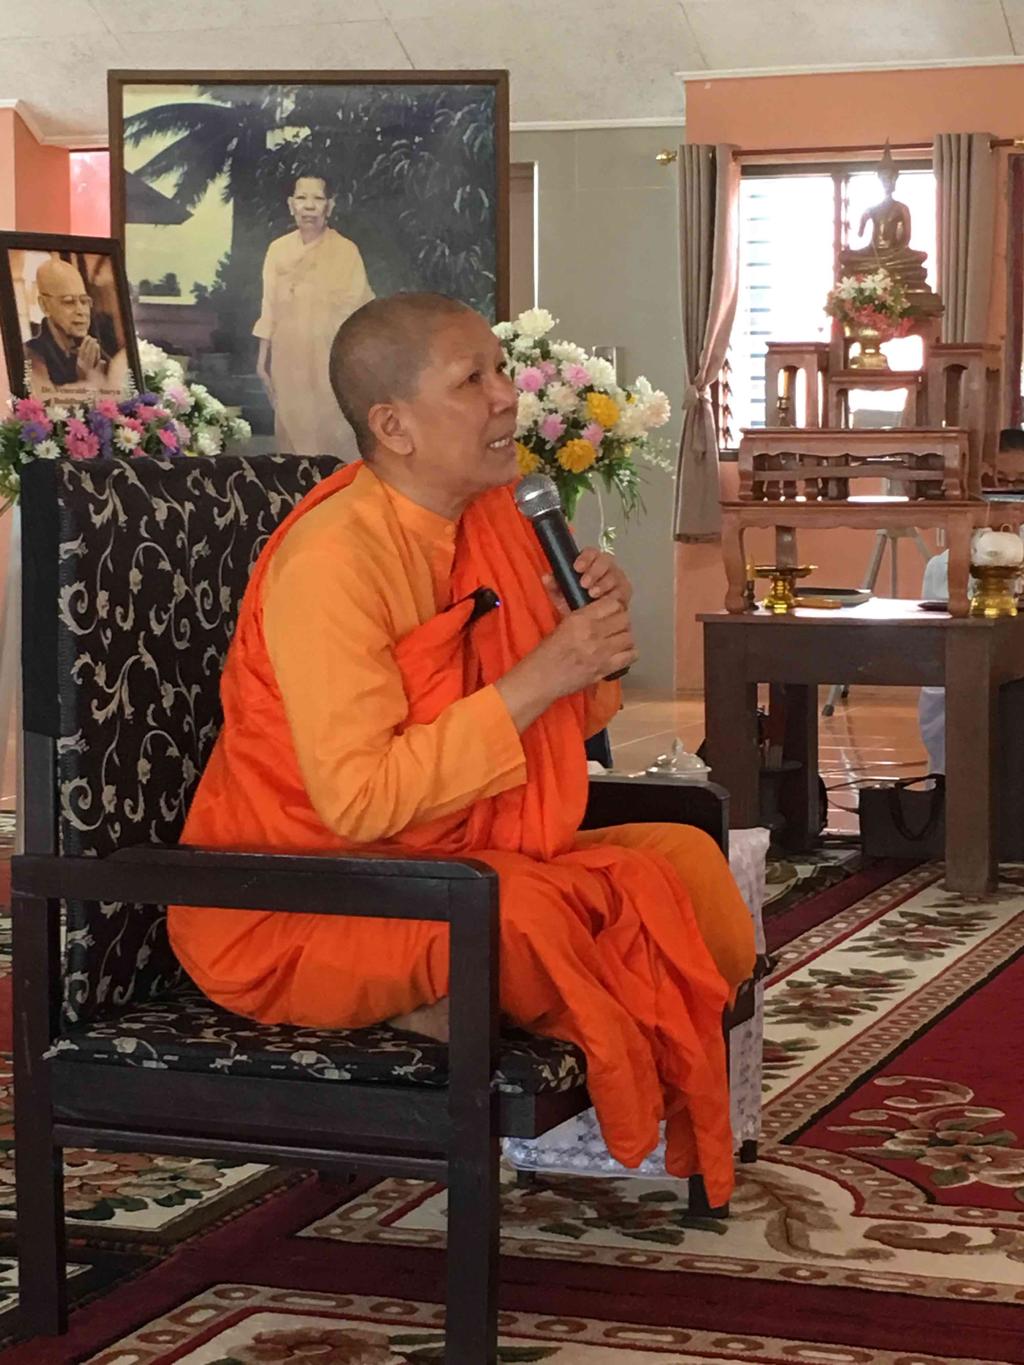 Buddhist Women s Revival Dhammananda Bhikkhuni, previously a professor of Buddhist philosophy known as Dr Chatsumarn Kabilsingh, was controversially ordained as first a novice and then a bhikkhuni in